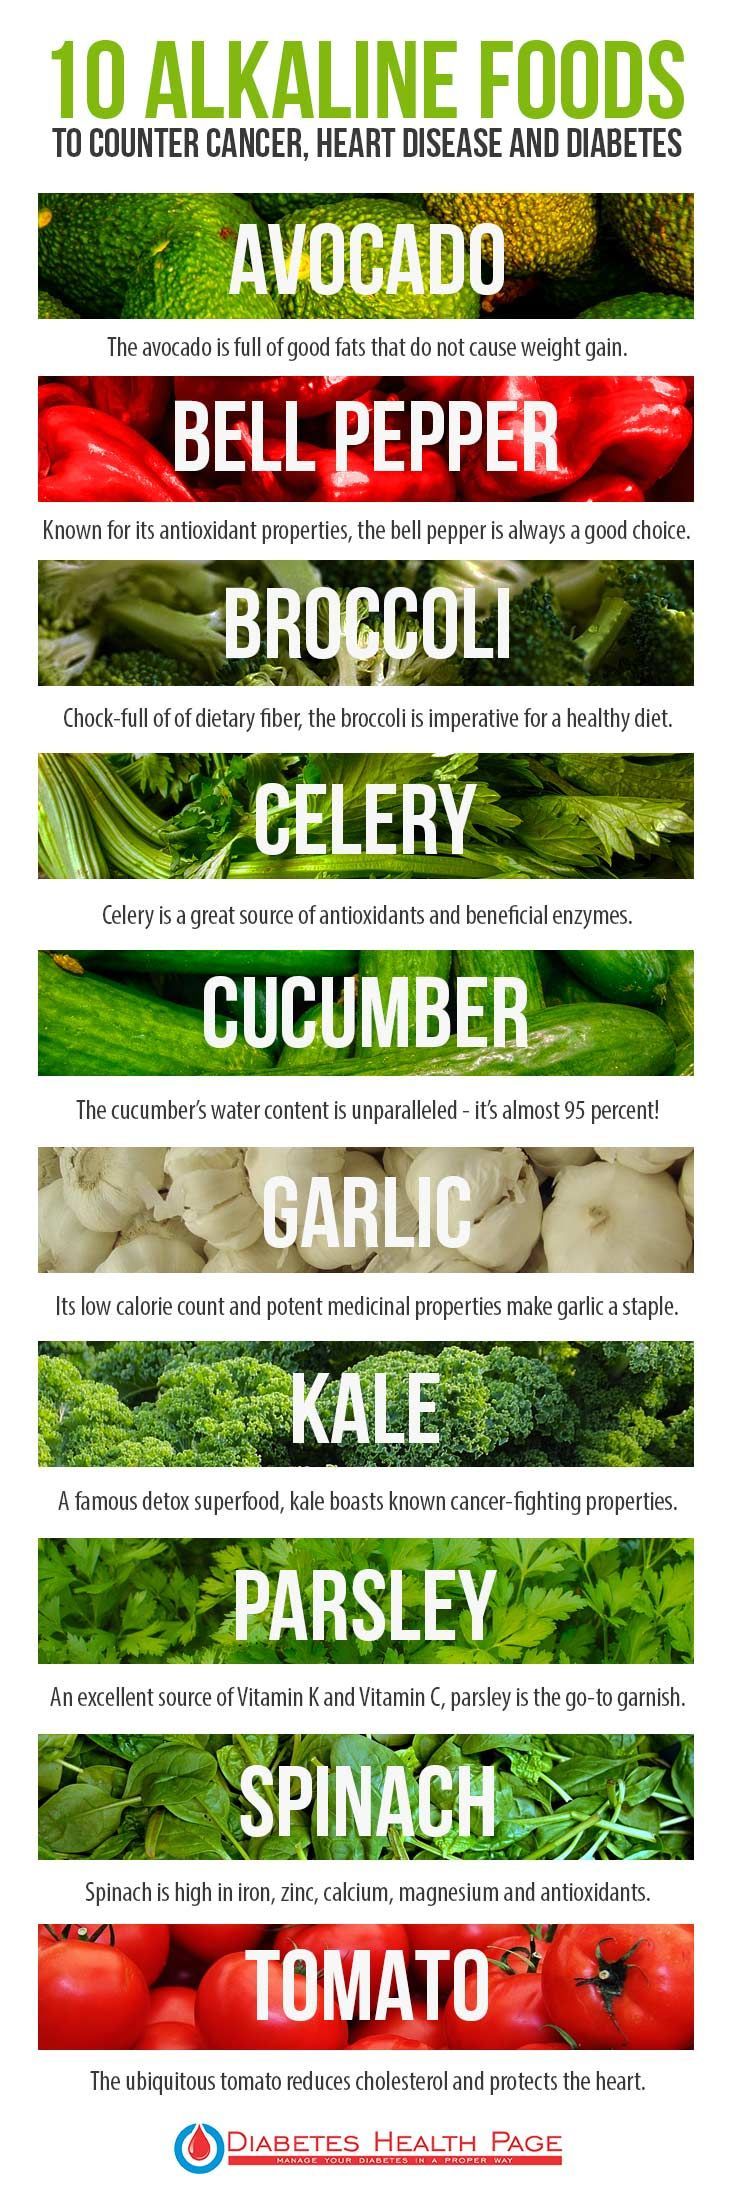 10 Alkaline Foods that Help Treat Gout, Diabetes, Cancer, and Heart Disease  Here’s a list of ten alkaline foods that are good for